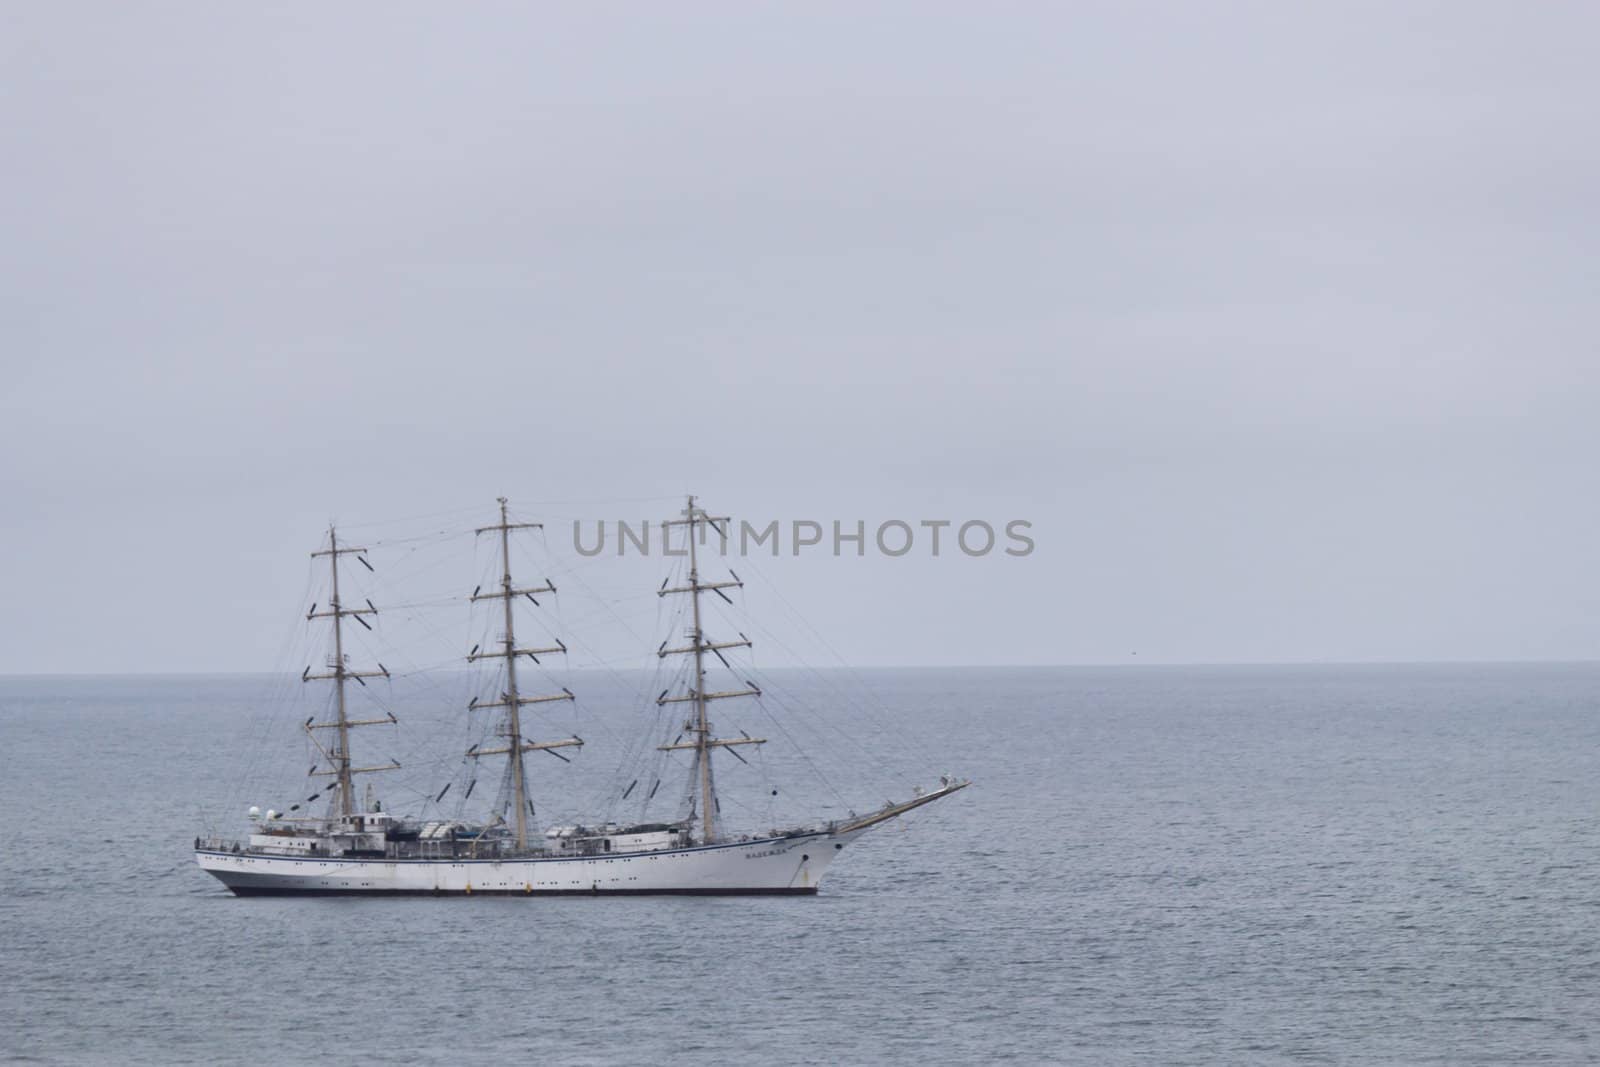 Sailing vessel "Nadezhda" in the sea in the cloudy afternoon